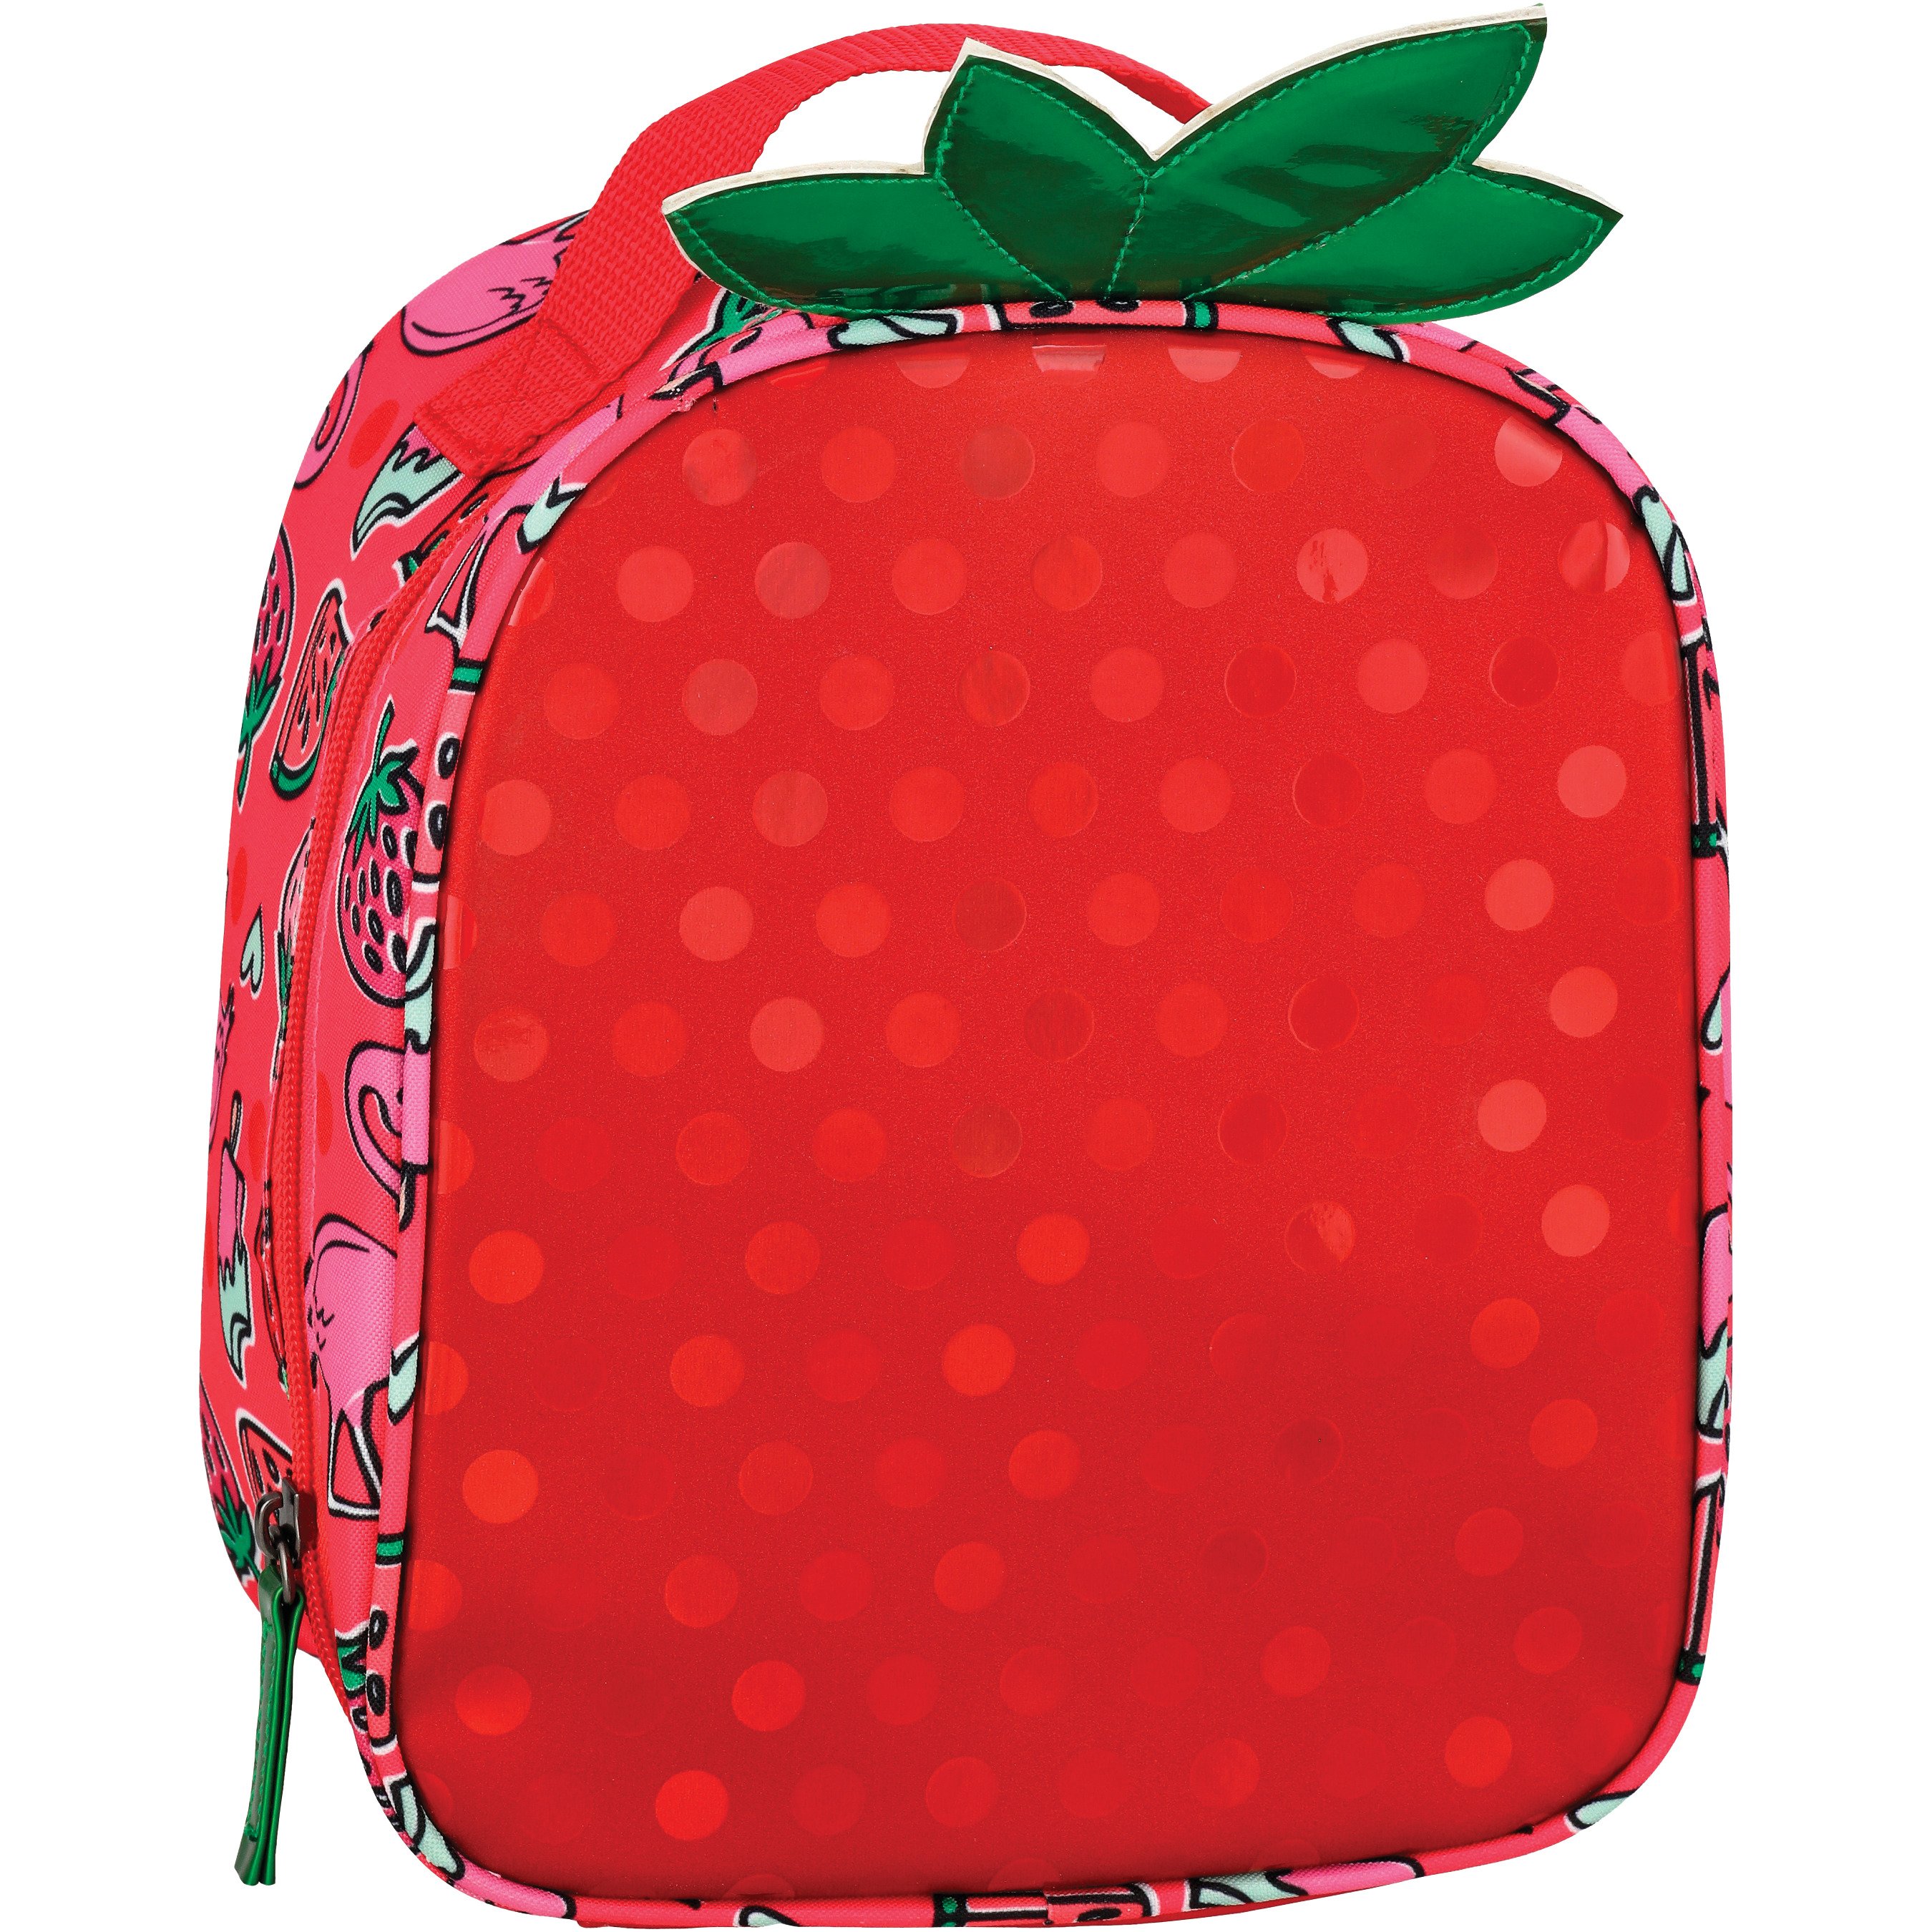  Fit+Fresh Novelty Insulated Lunch Box for Kids, Lunch